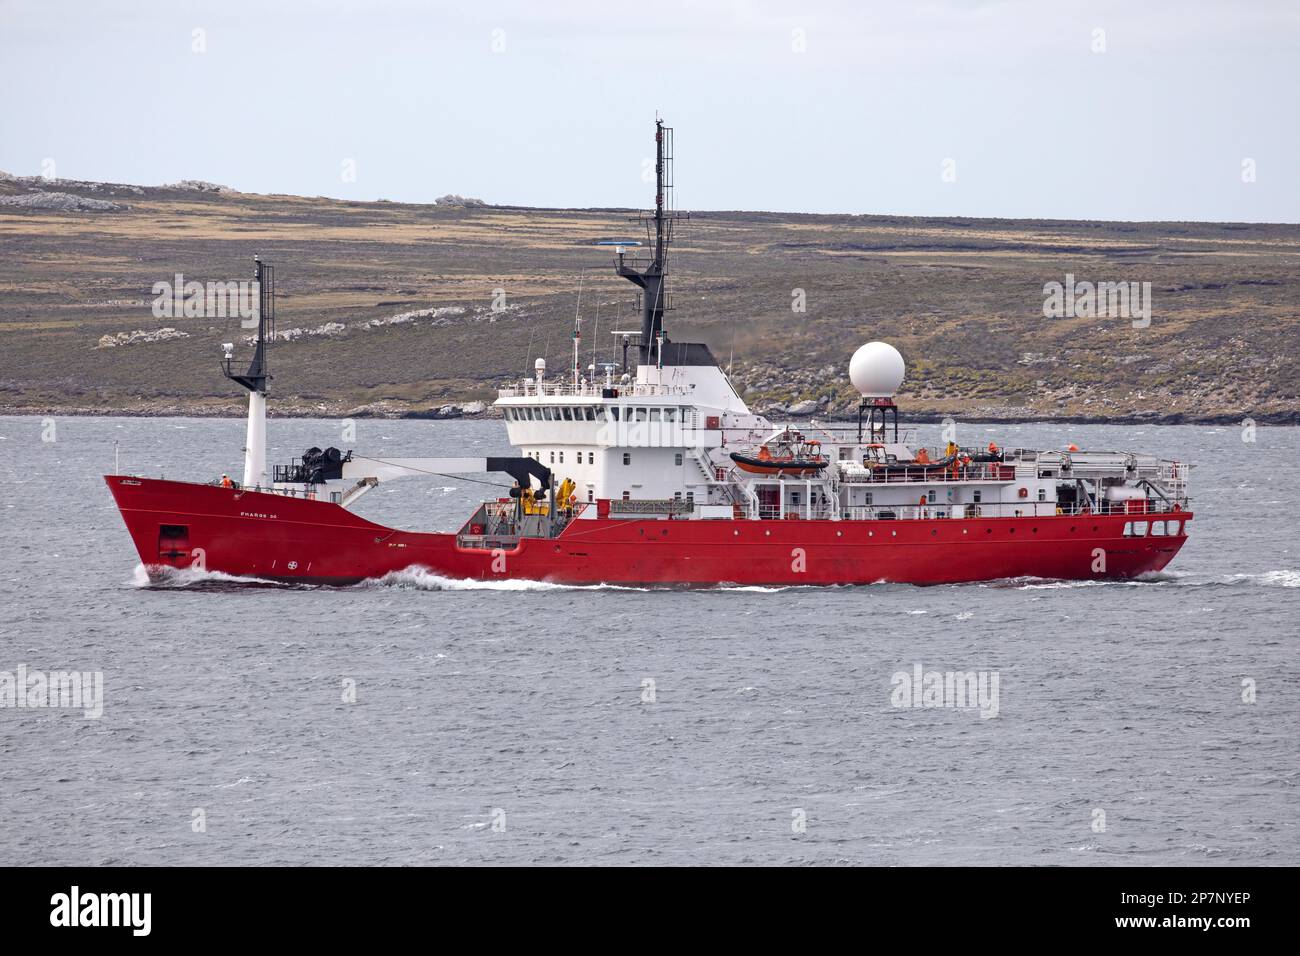 The Pharos SG, a fishery patrol ship, built in 1993, and owned by Byron Marine of The Falkland Islands. Stock Photo